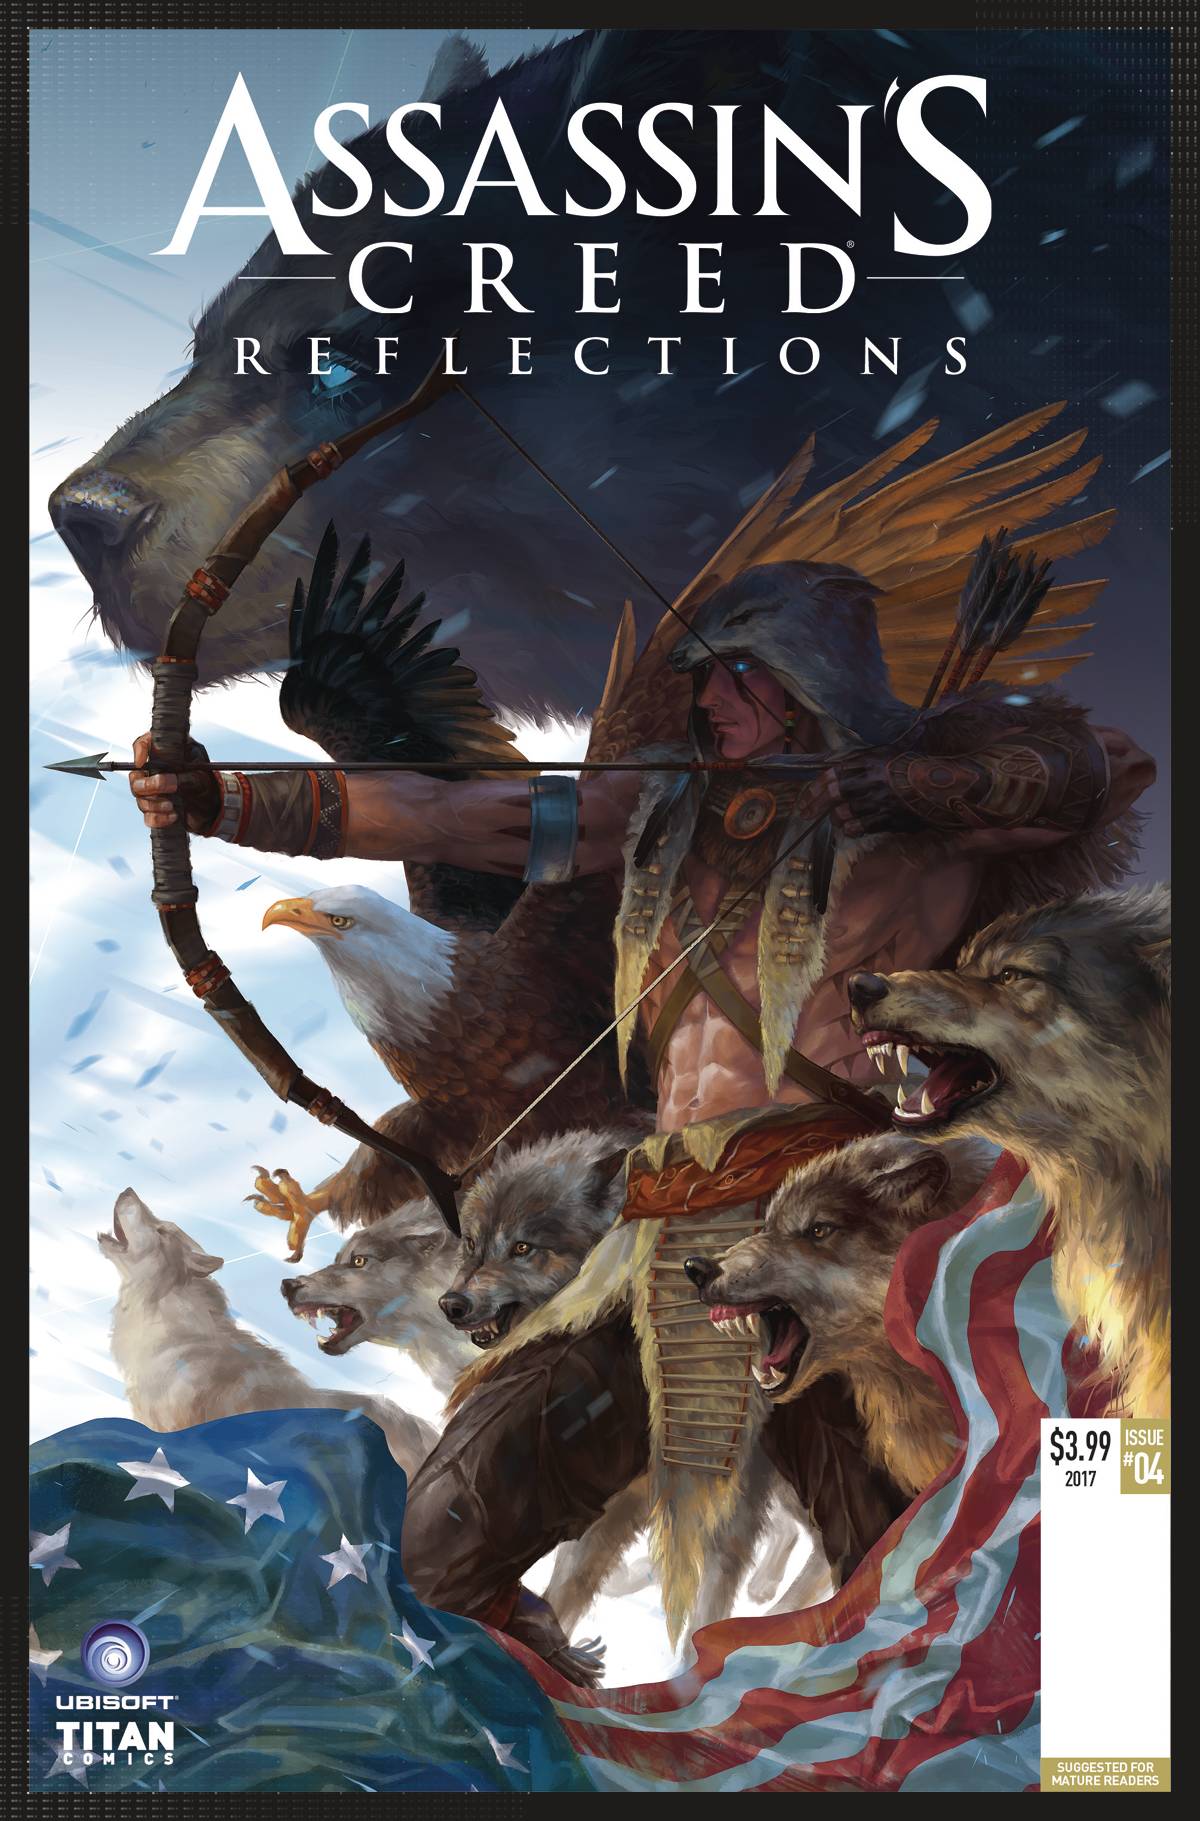 Assassins Creed Reflections #4 Cover A Sunsetagain (Mature) (Of 4)